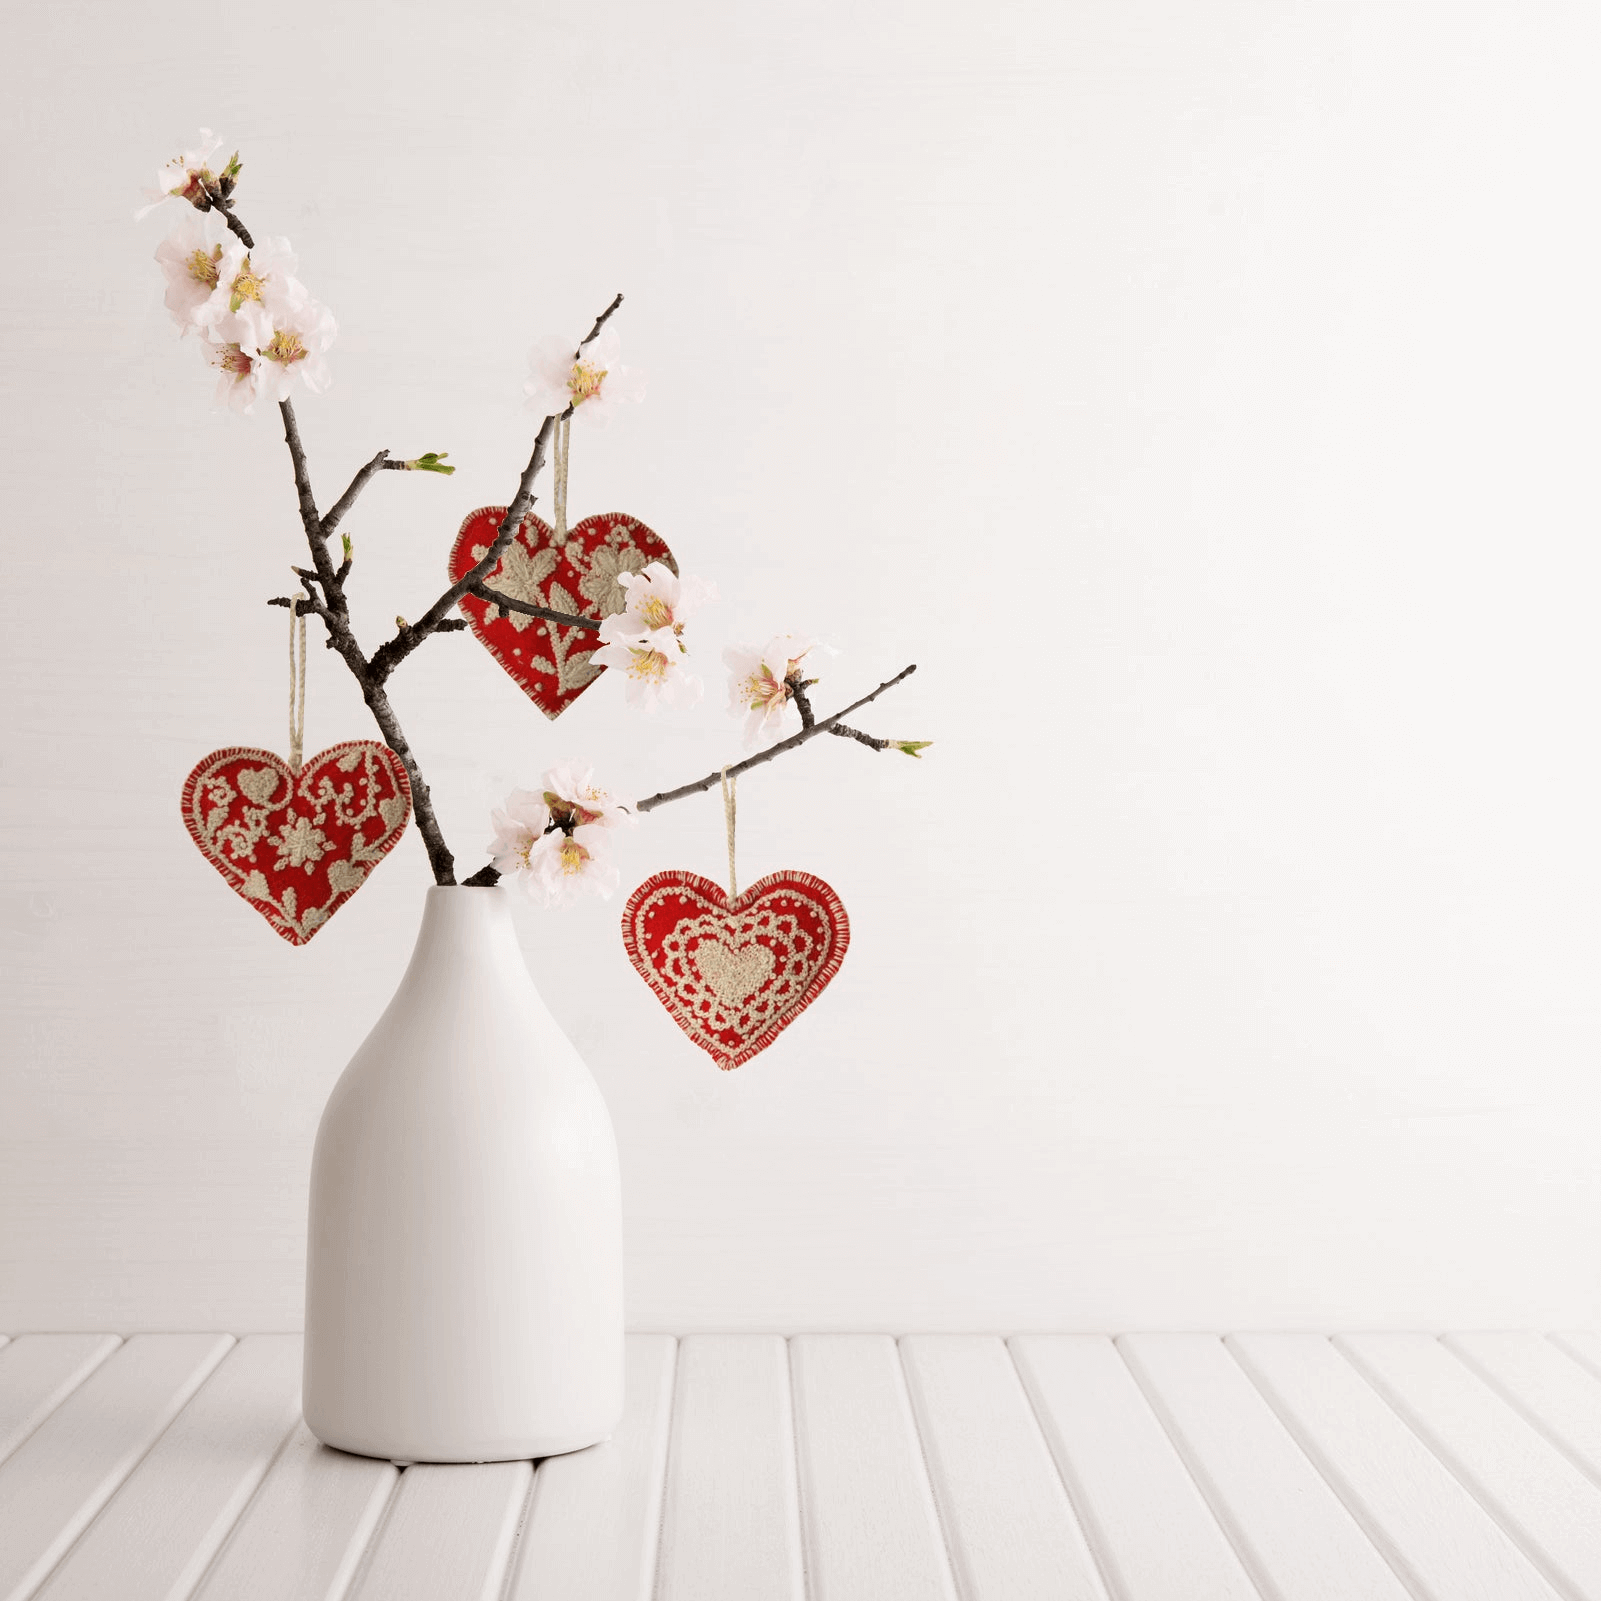 Set fo three embroidered heart ornaments